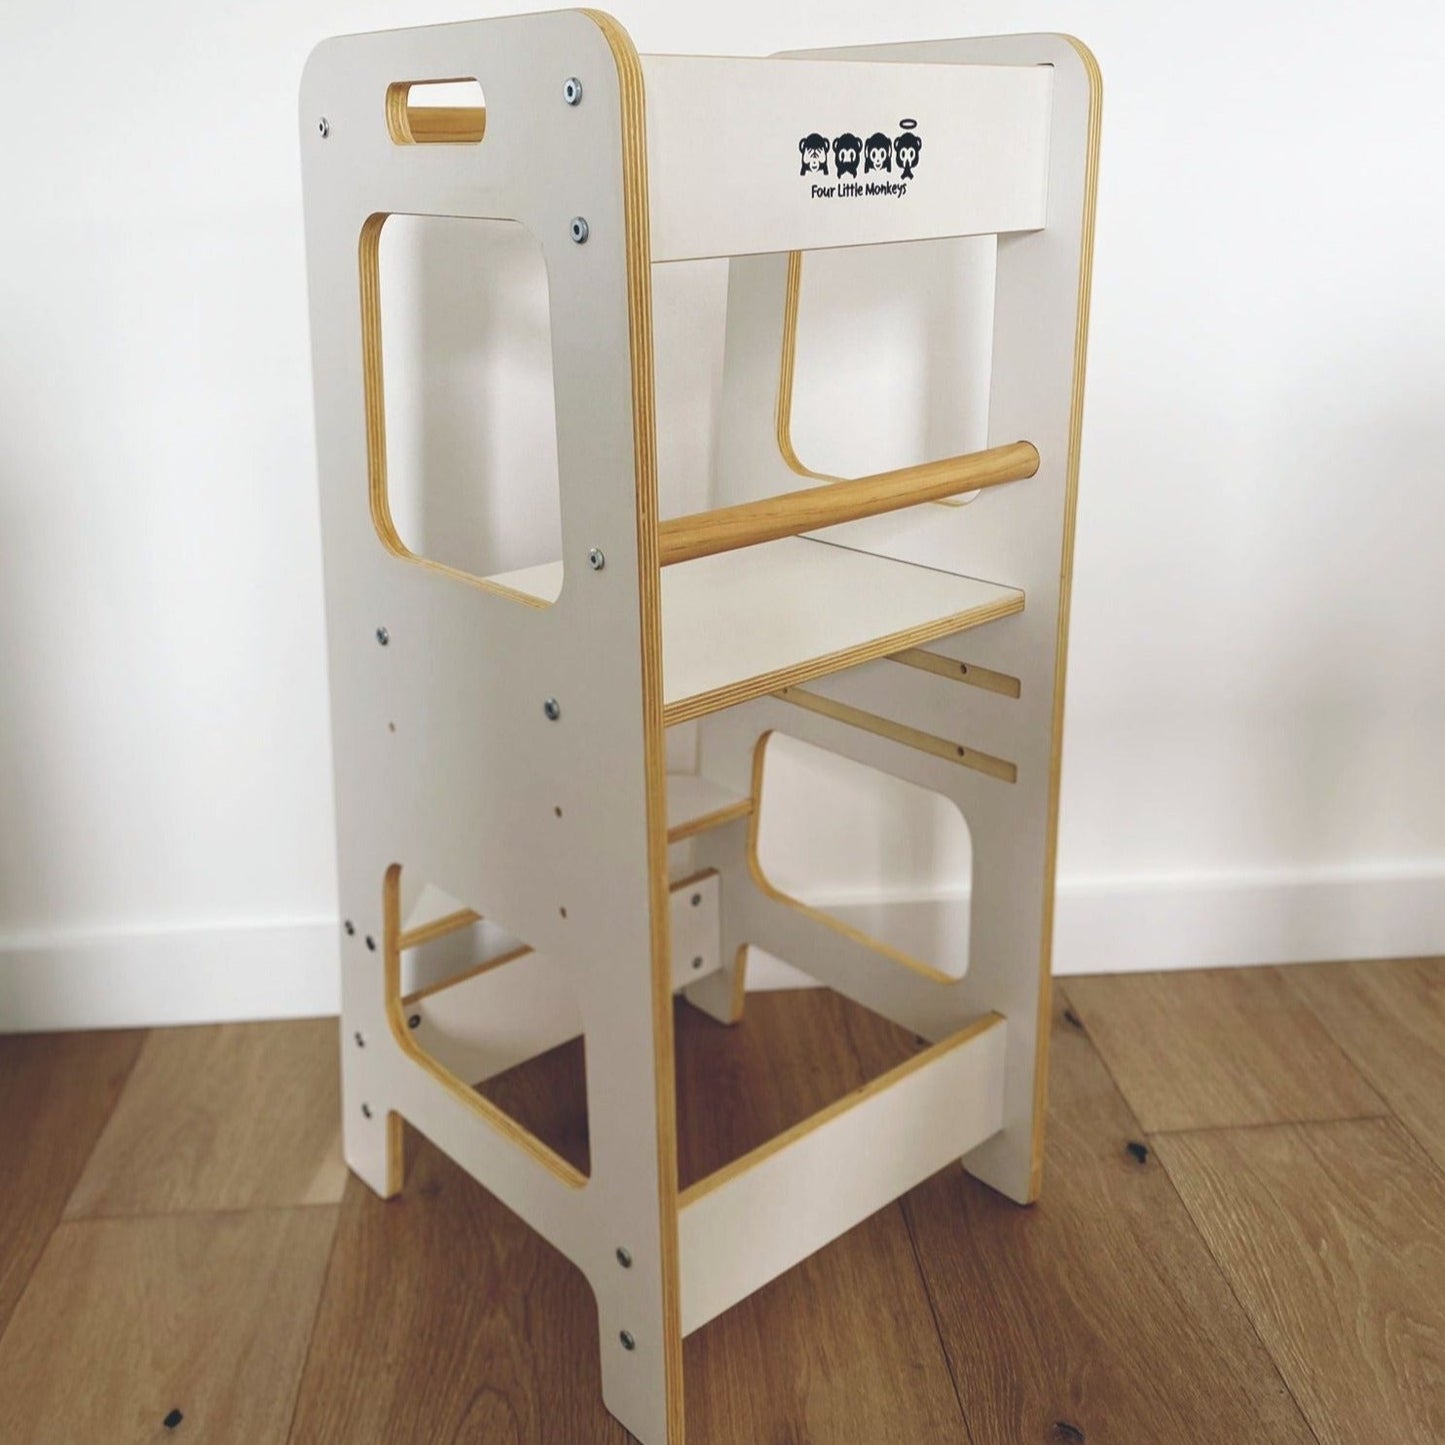 'Adjustable Learning Tower in a White finish' by Four Little Monkeys